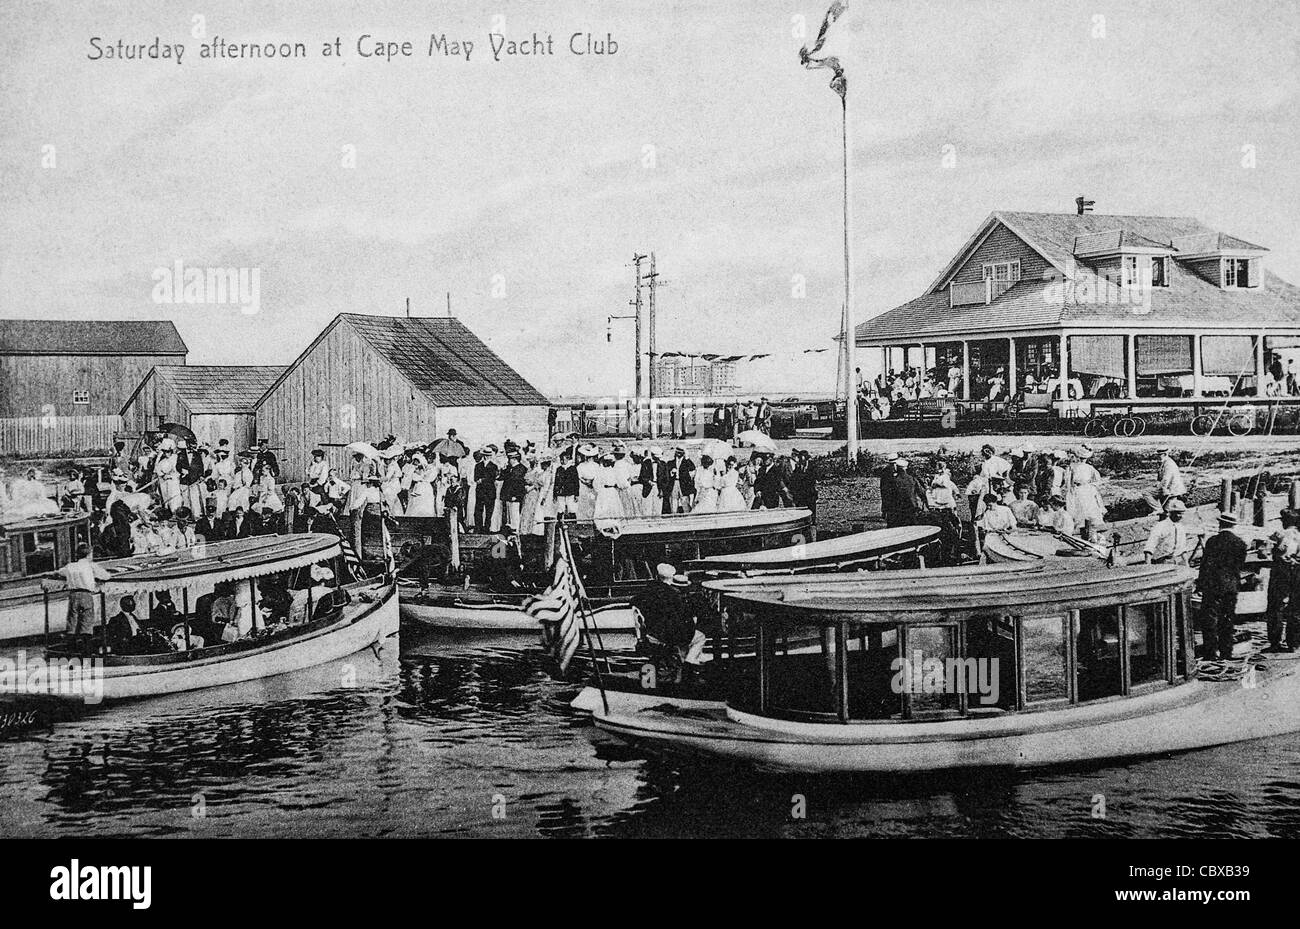 Sonntag Nachmittag im Cape May Yacht Club, Cape May, New Jersey, ca. 1920 Stockfoto